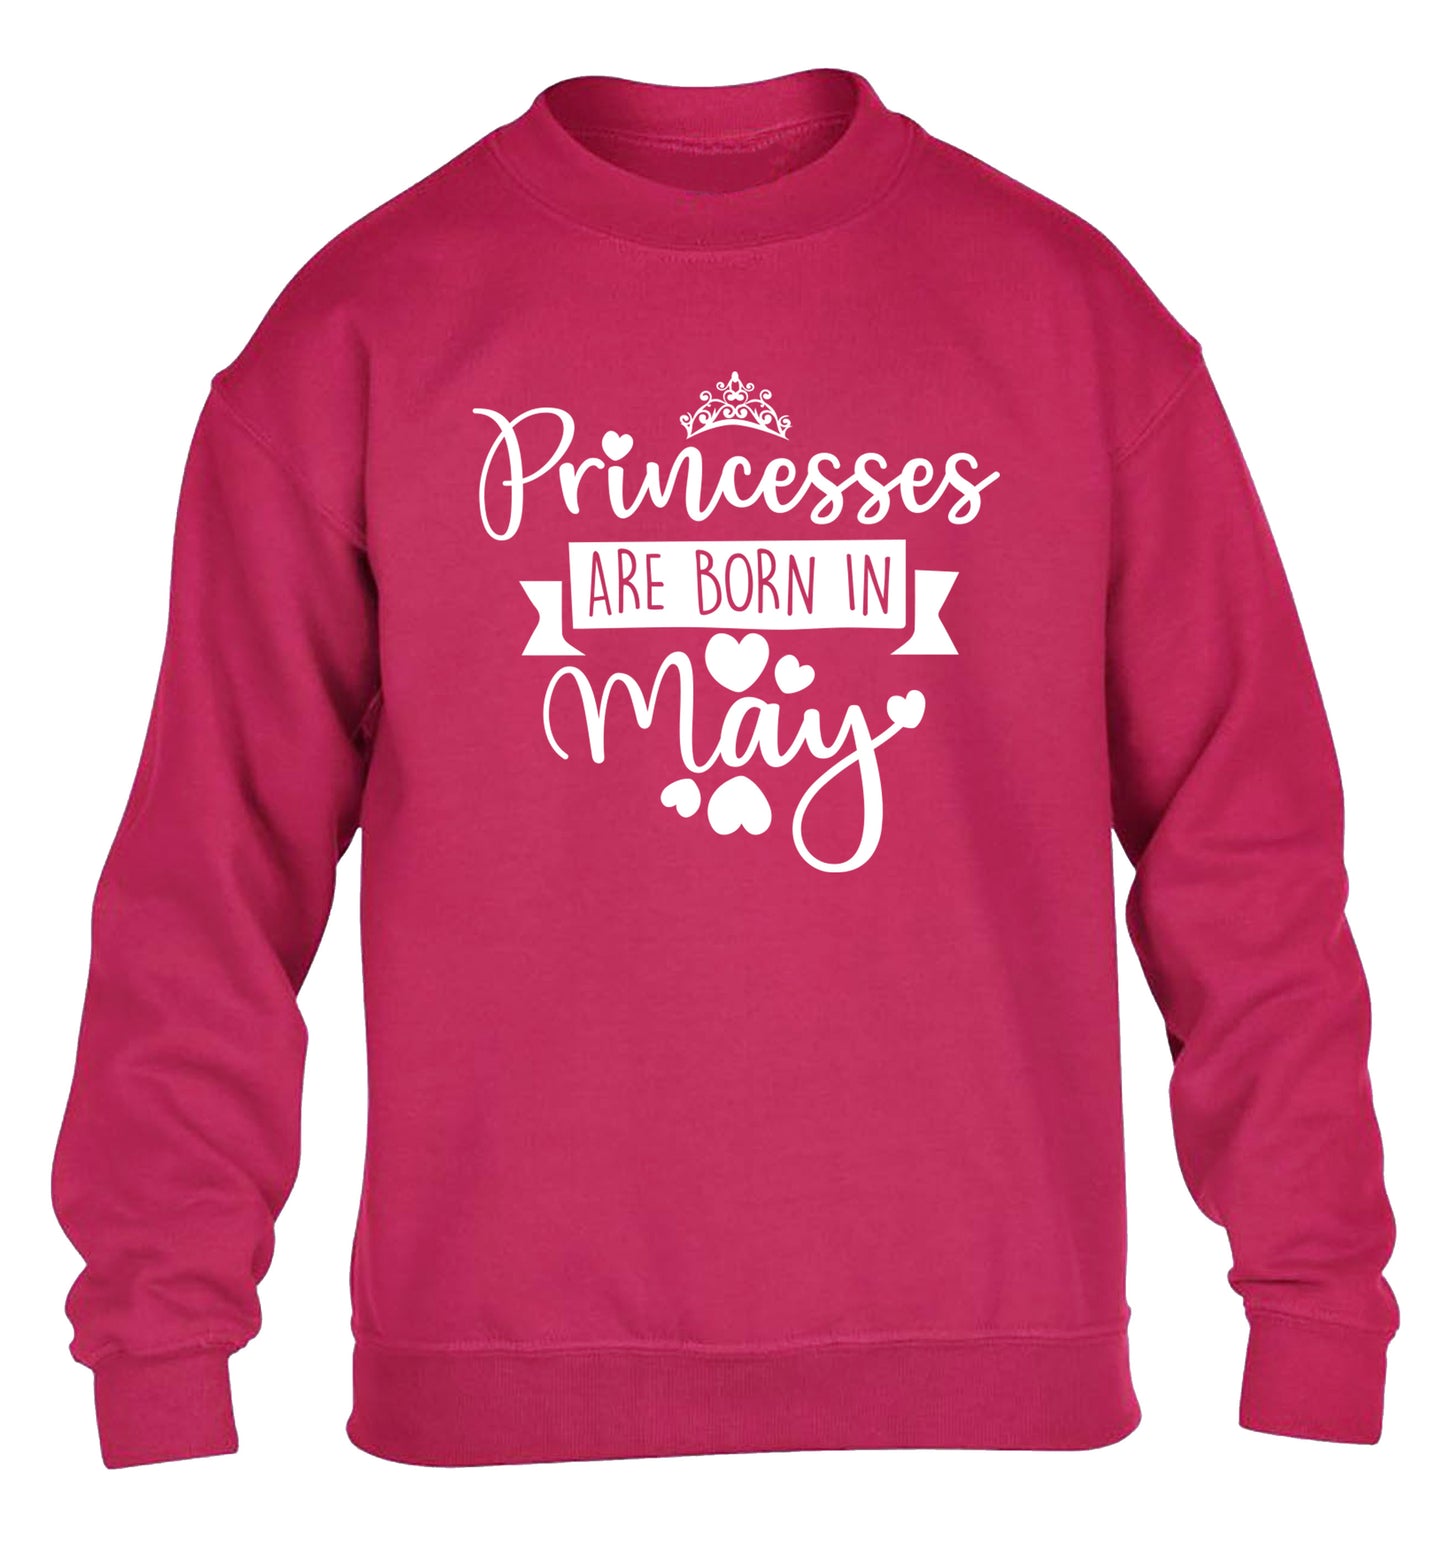 Princesses are born in May children's pink sweater 12-13 Years